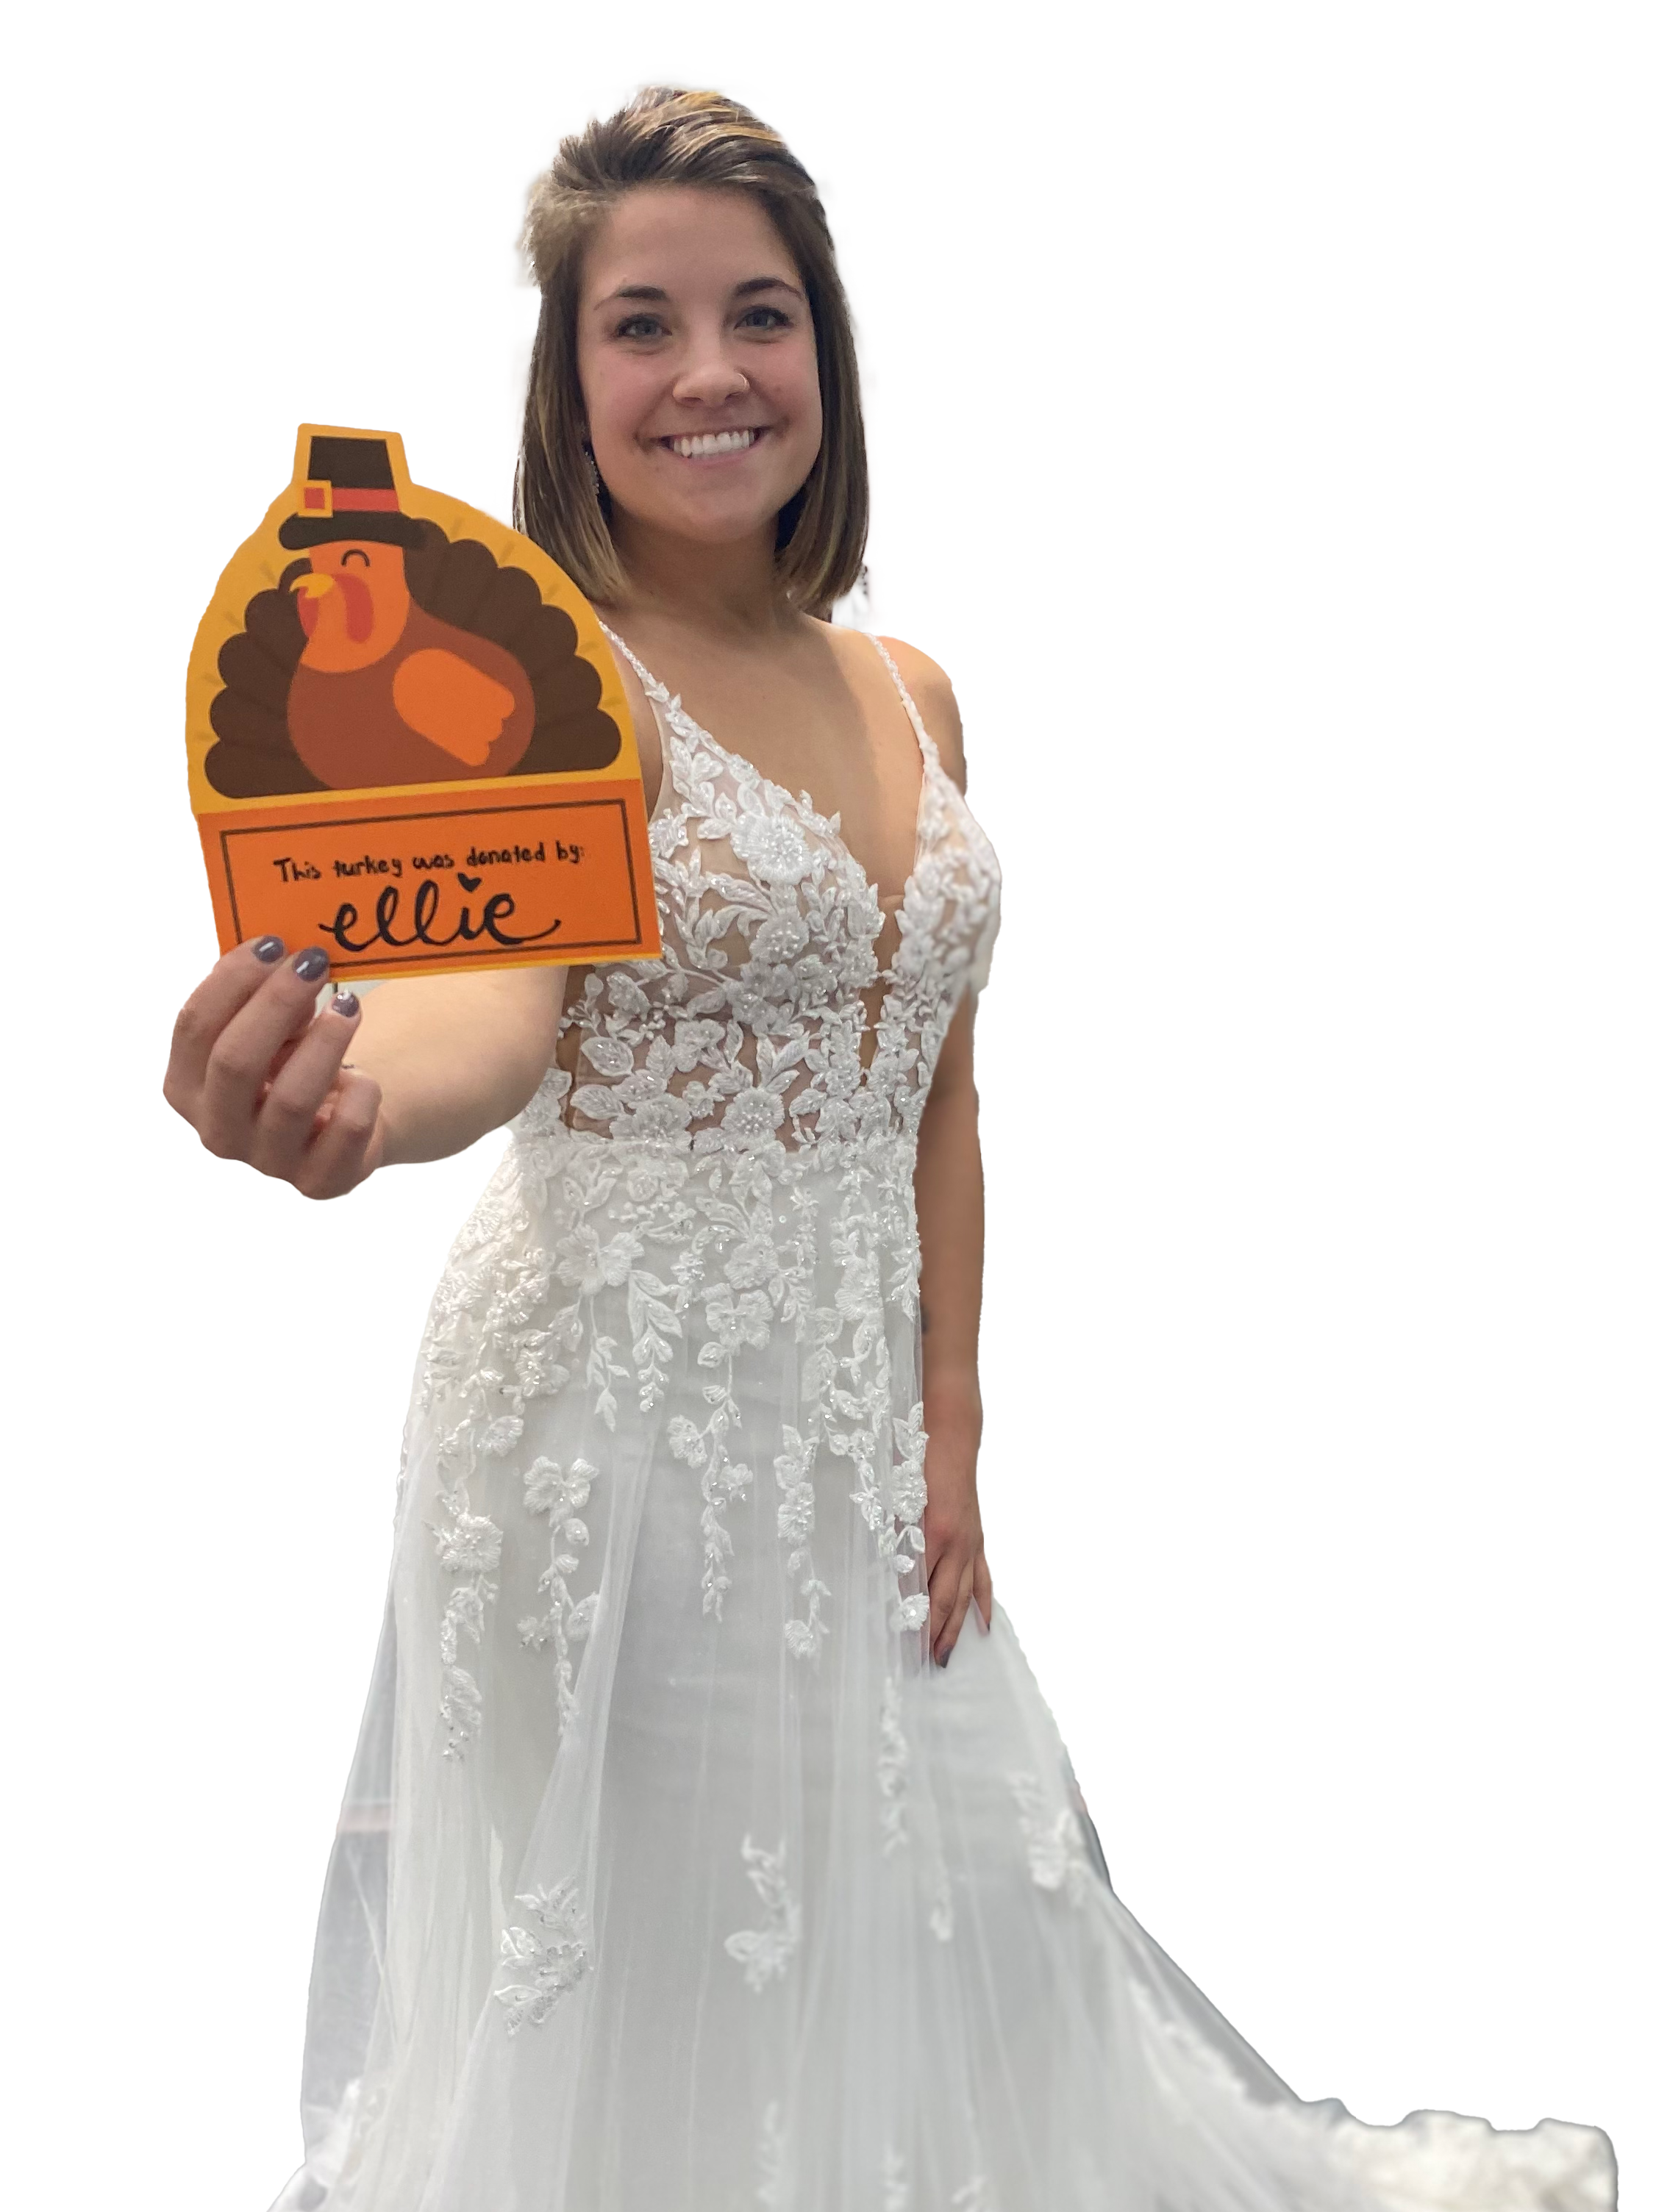 smiling brdie in white bridal gown holding a card saying "This turkey was donated by Ellie"